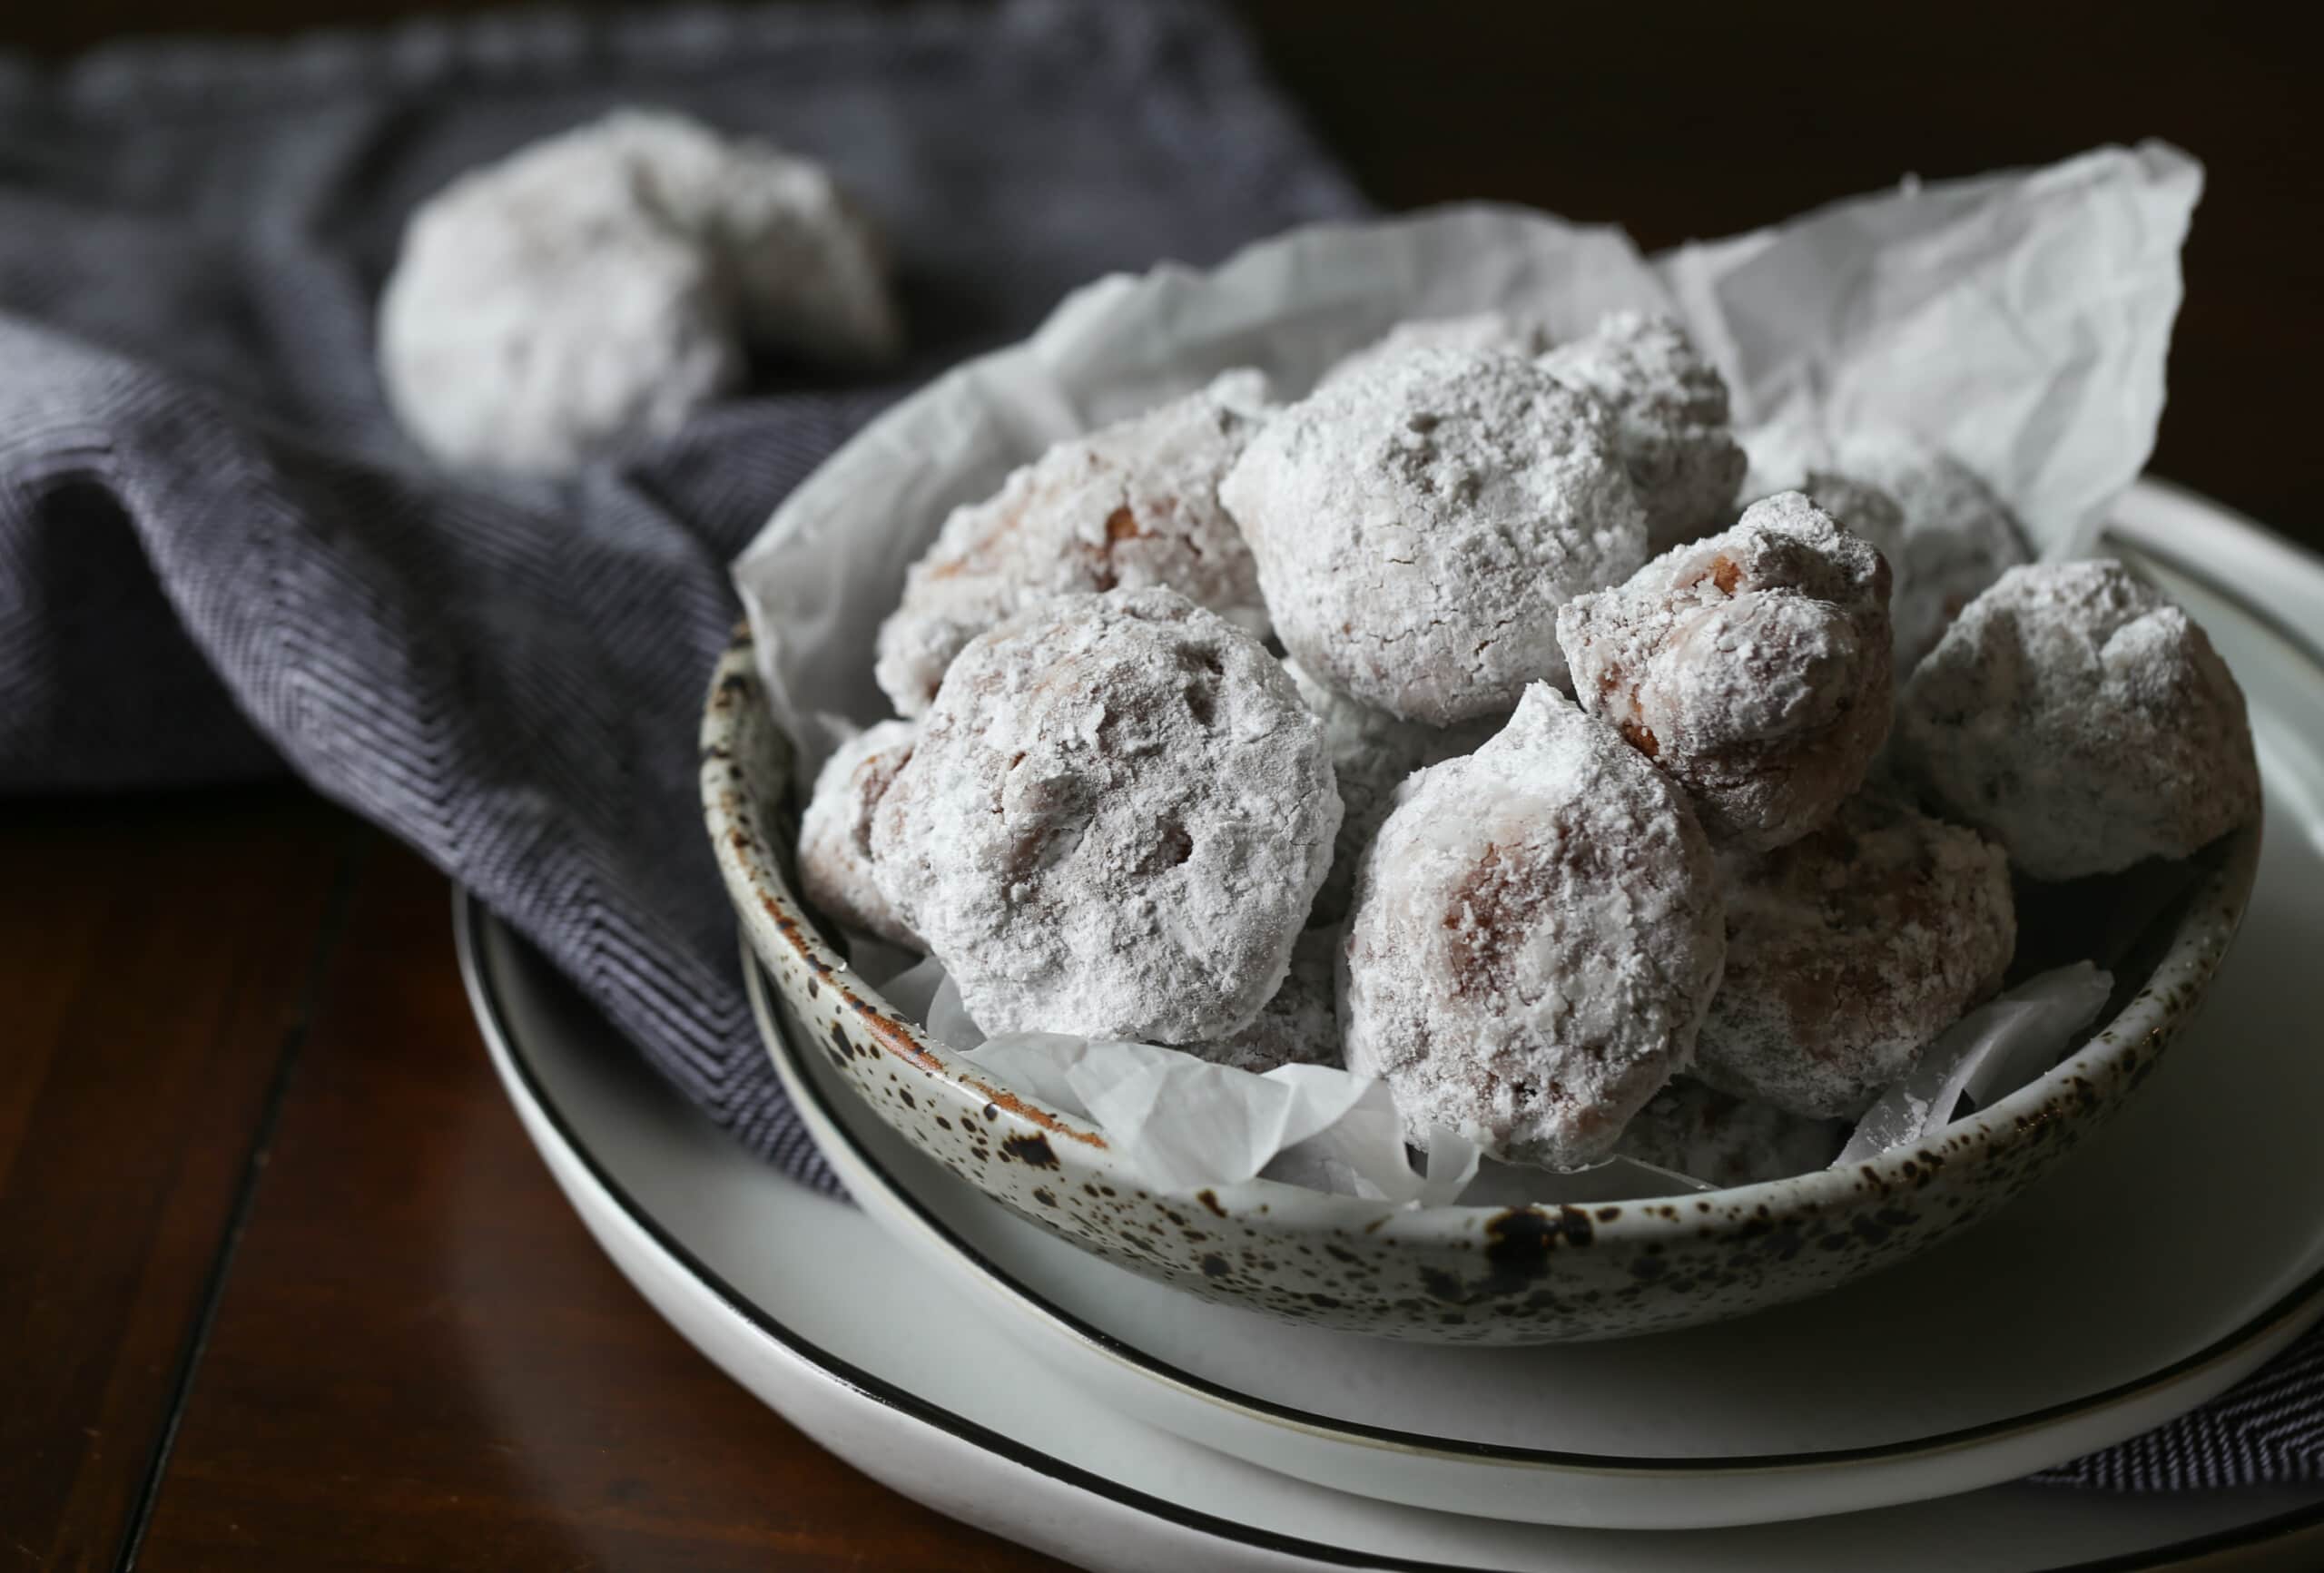 donuts coated in powdered sugar in a bowl